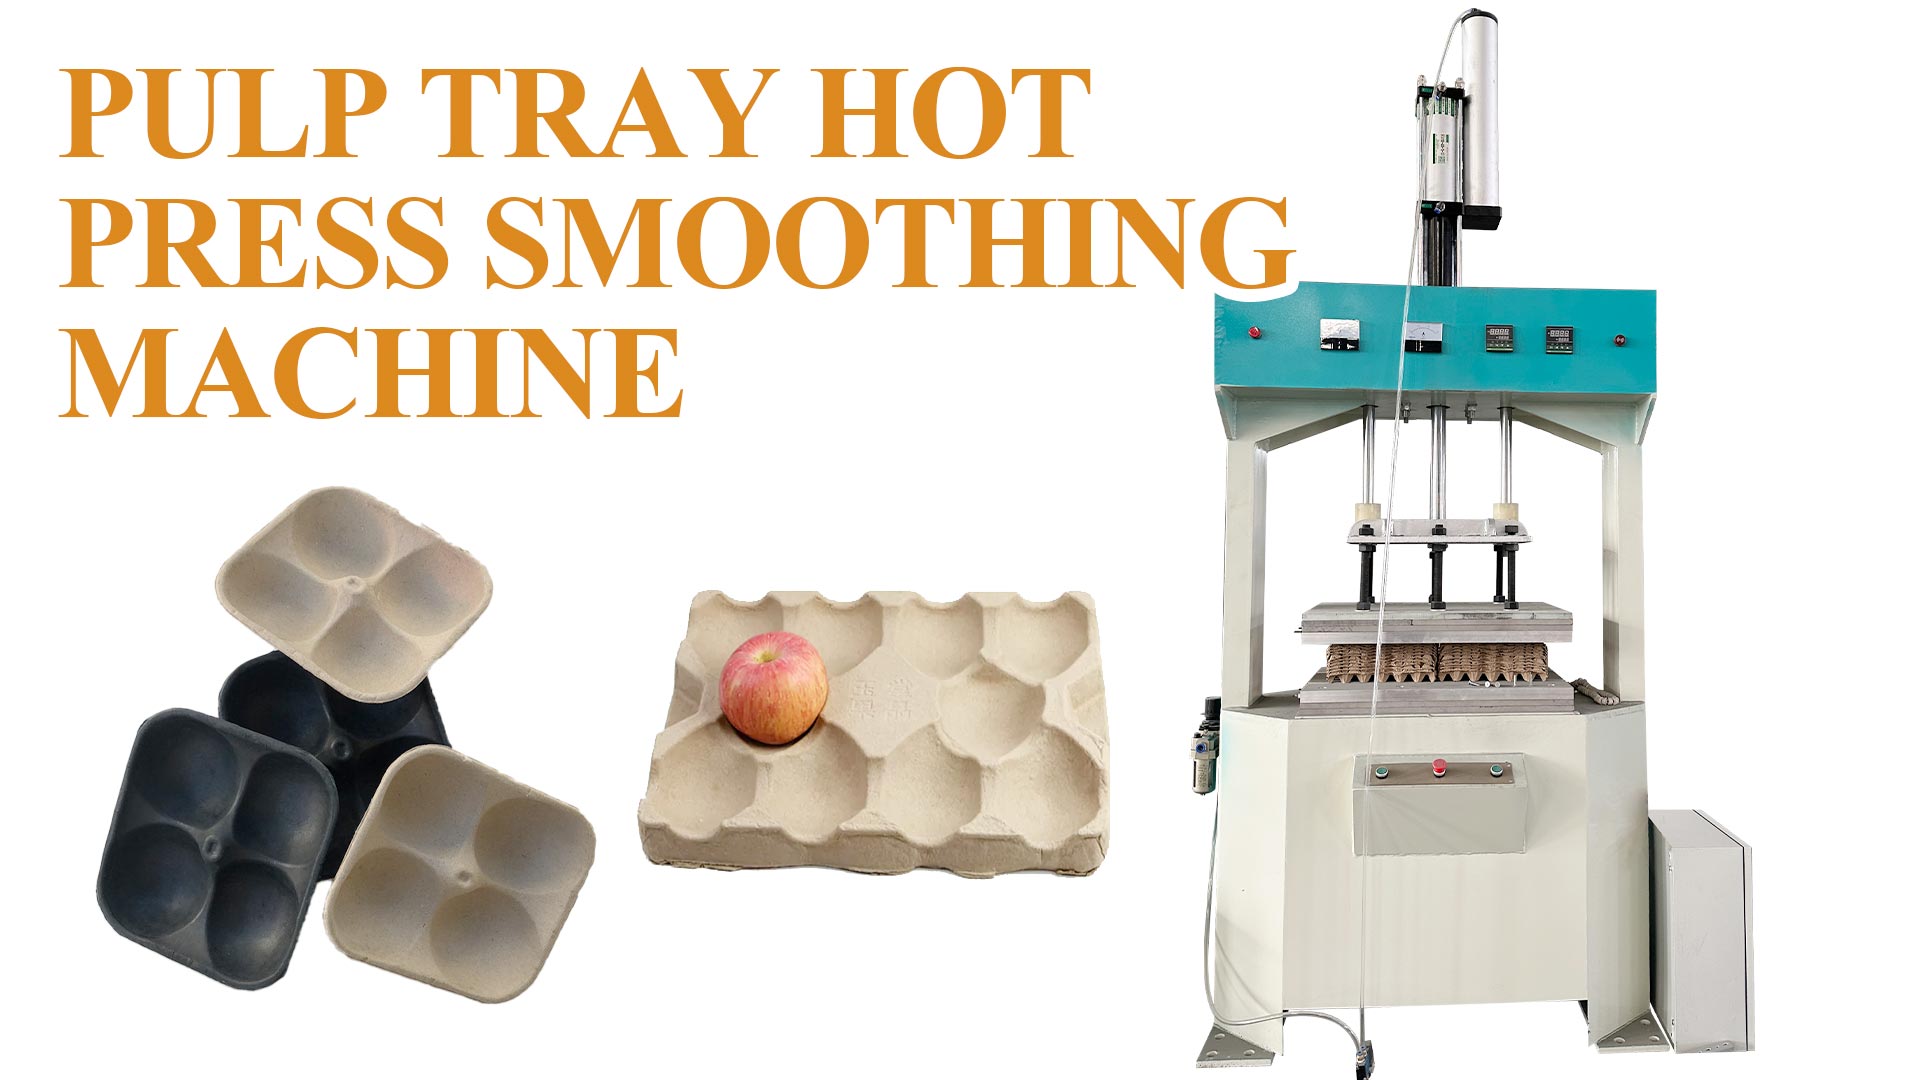 Pulp Tray Hot Press Machine for Smoothing